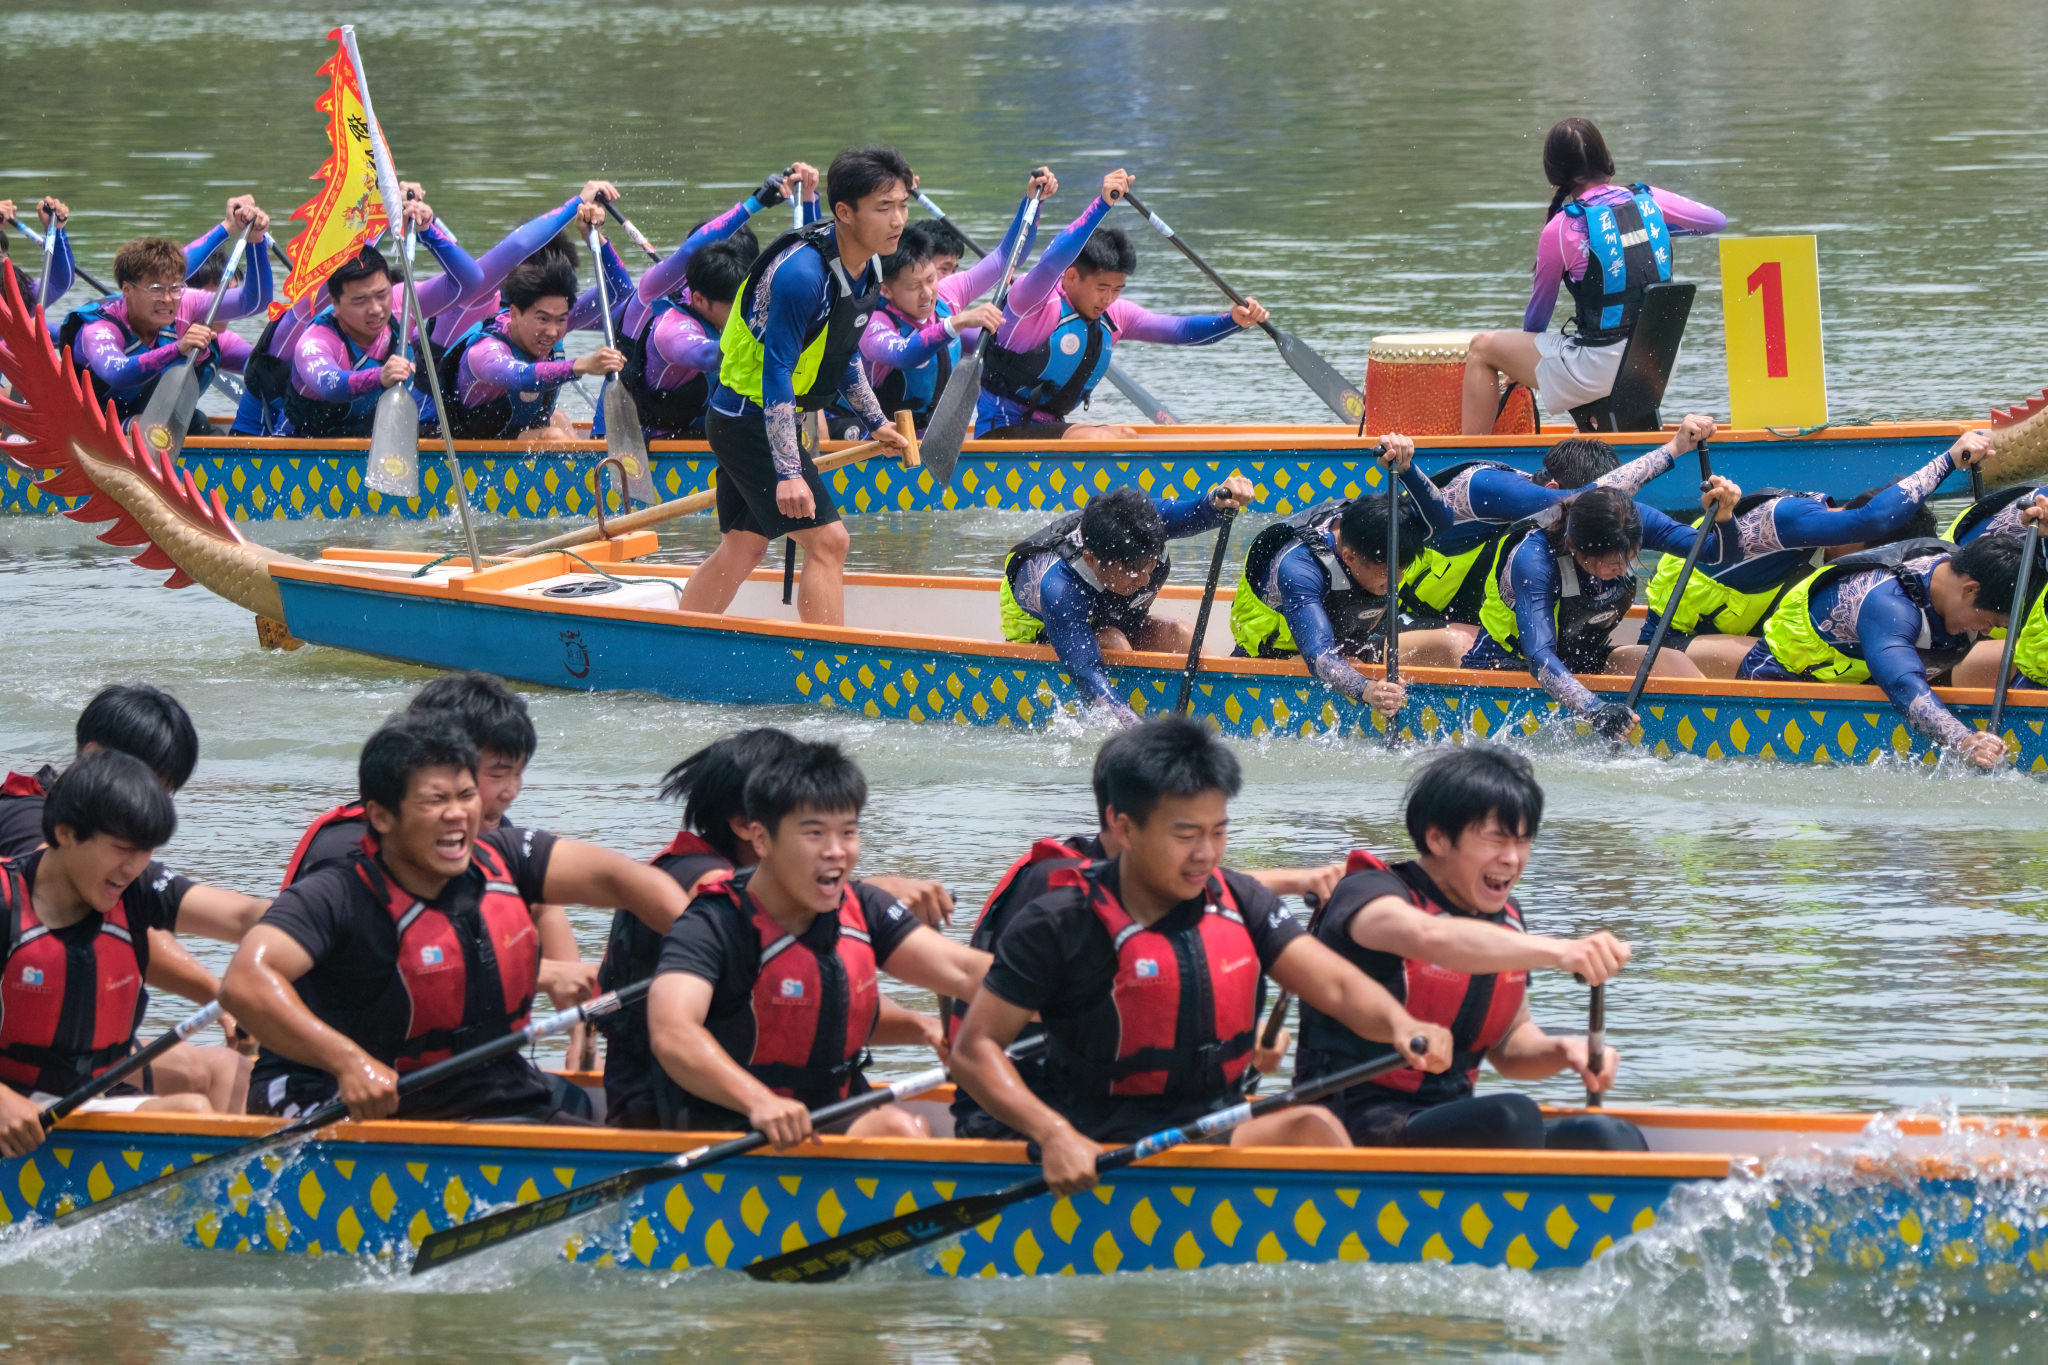 Participants paddle in their dragon boat during a race held on the Qinhuai River in Nanjing, Jiangsu Province on May 19, 2024. /CFP